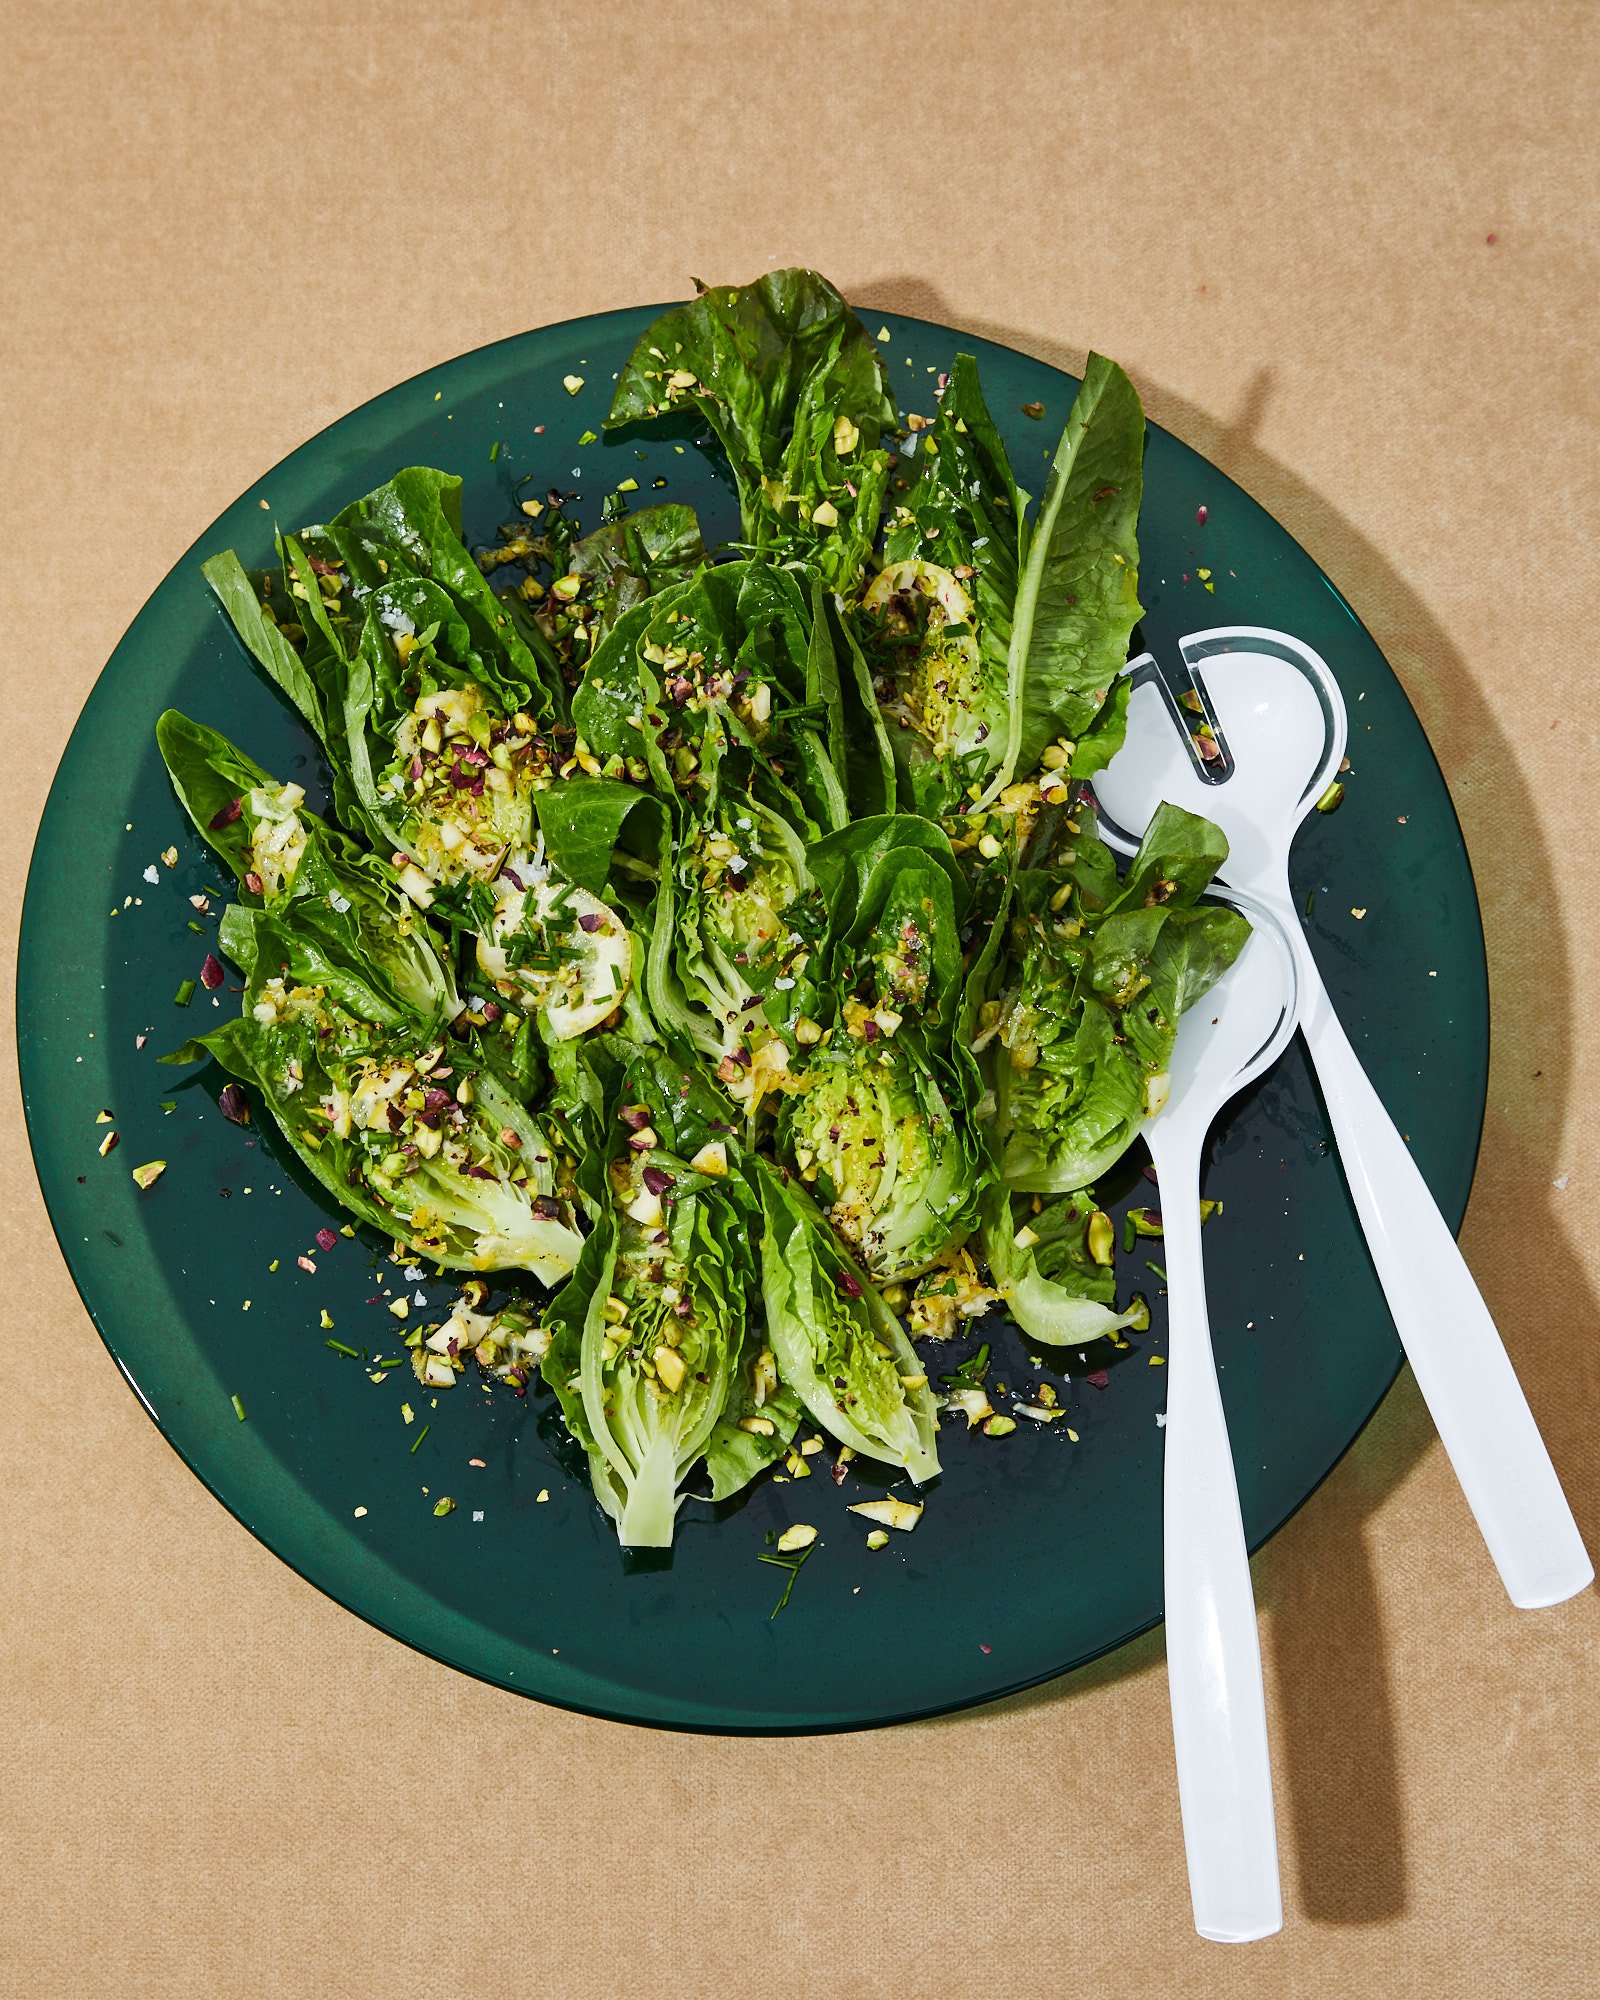 Little Gem Salad With Garlicky Almond Dressing Recipe - NYT Cooking